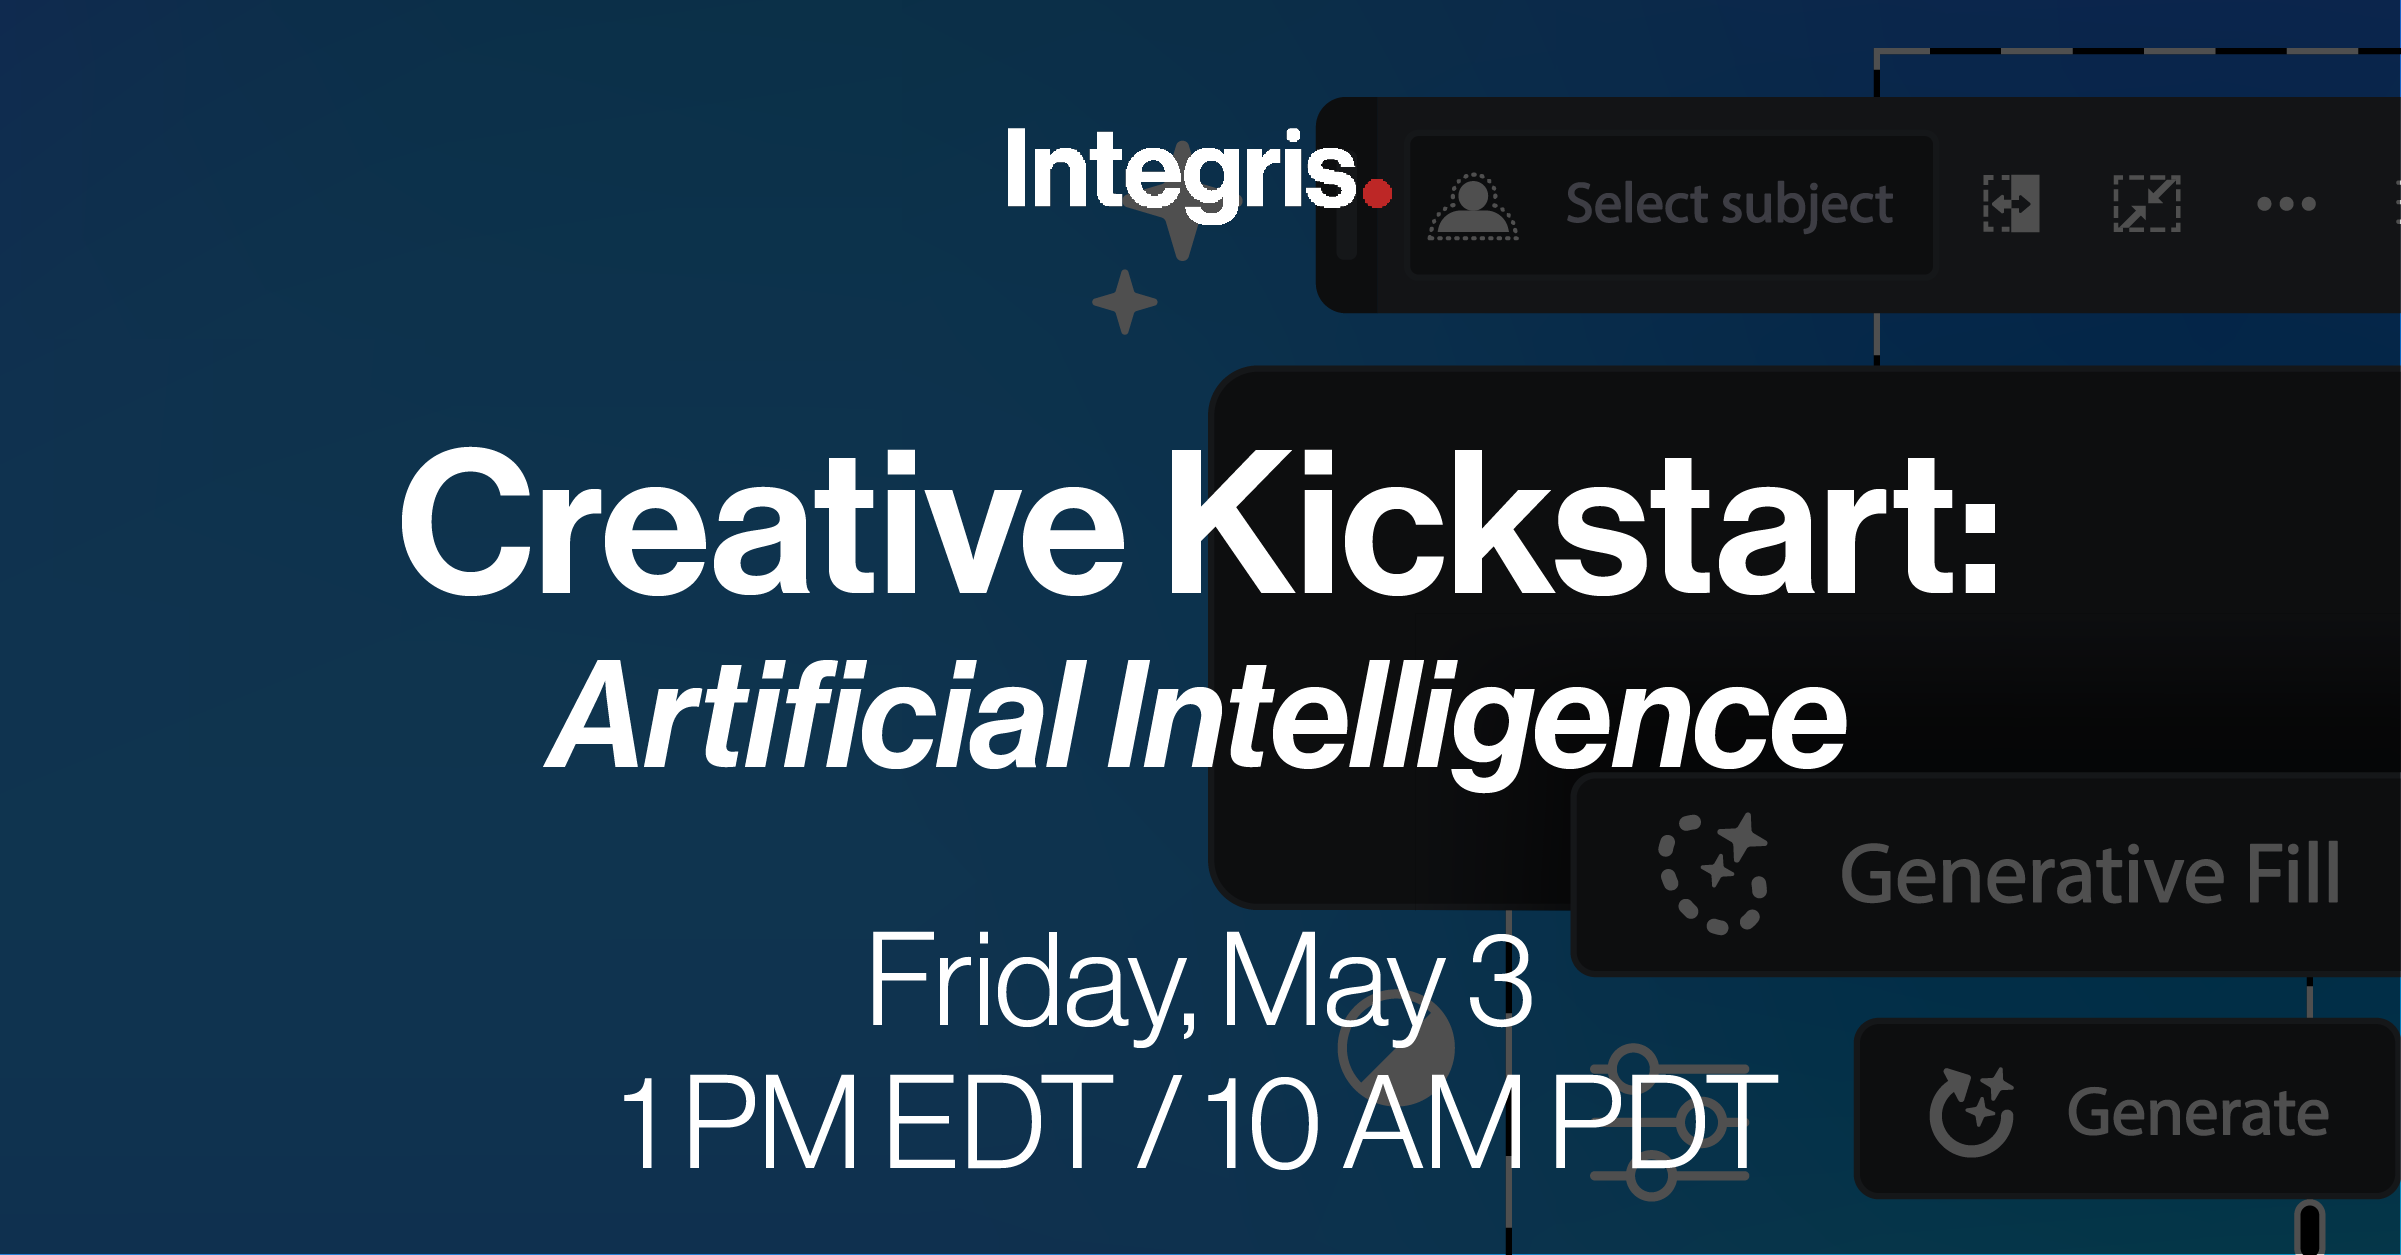 Webinar announcement for "creative kickstart: artificial intelligence" scheduled for friday, may 3, at 1 pm edt / 10 am pdt.